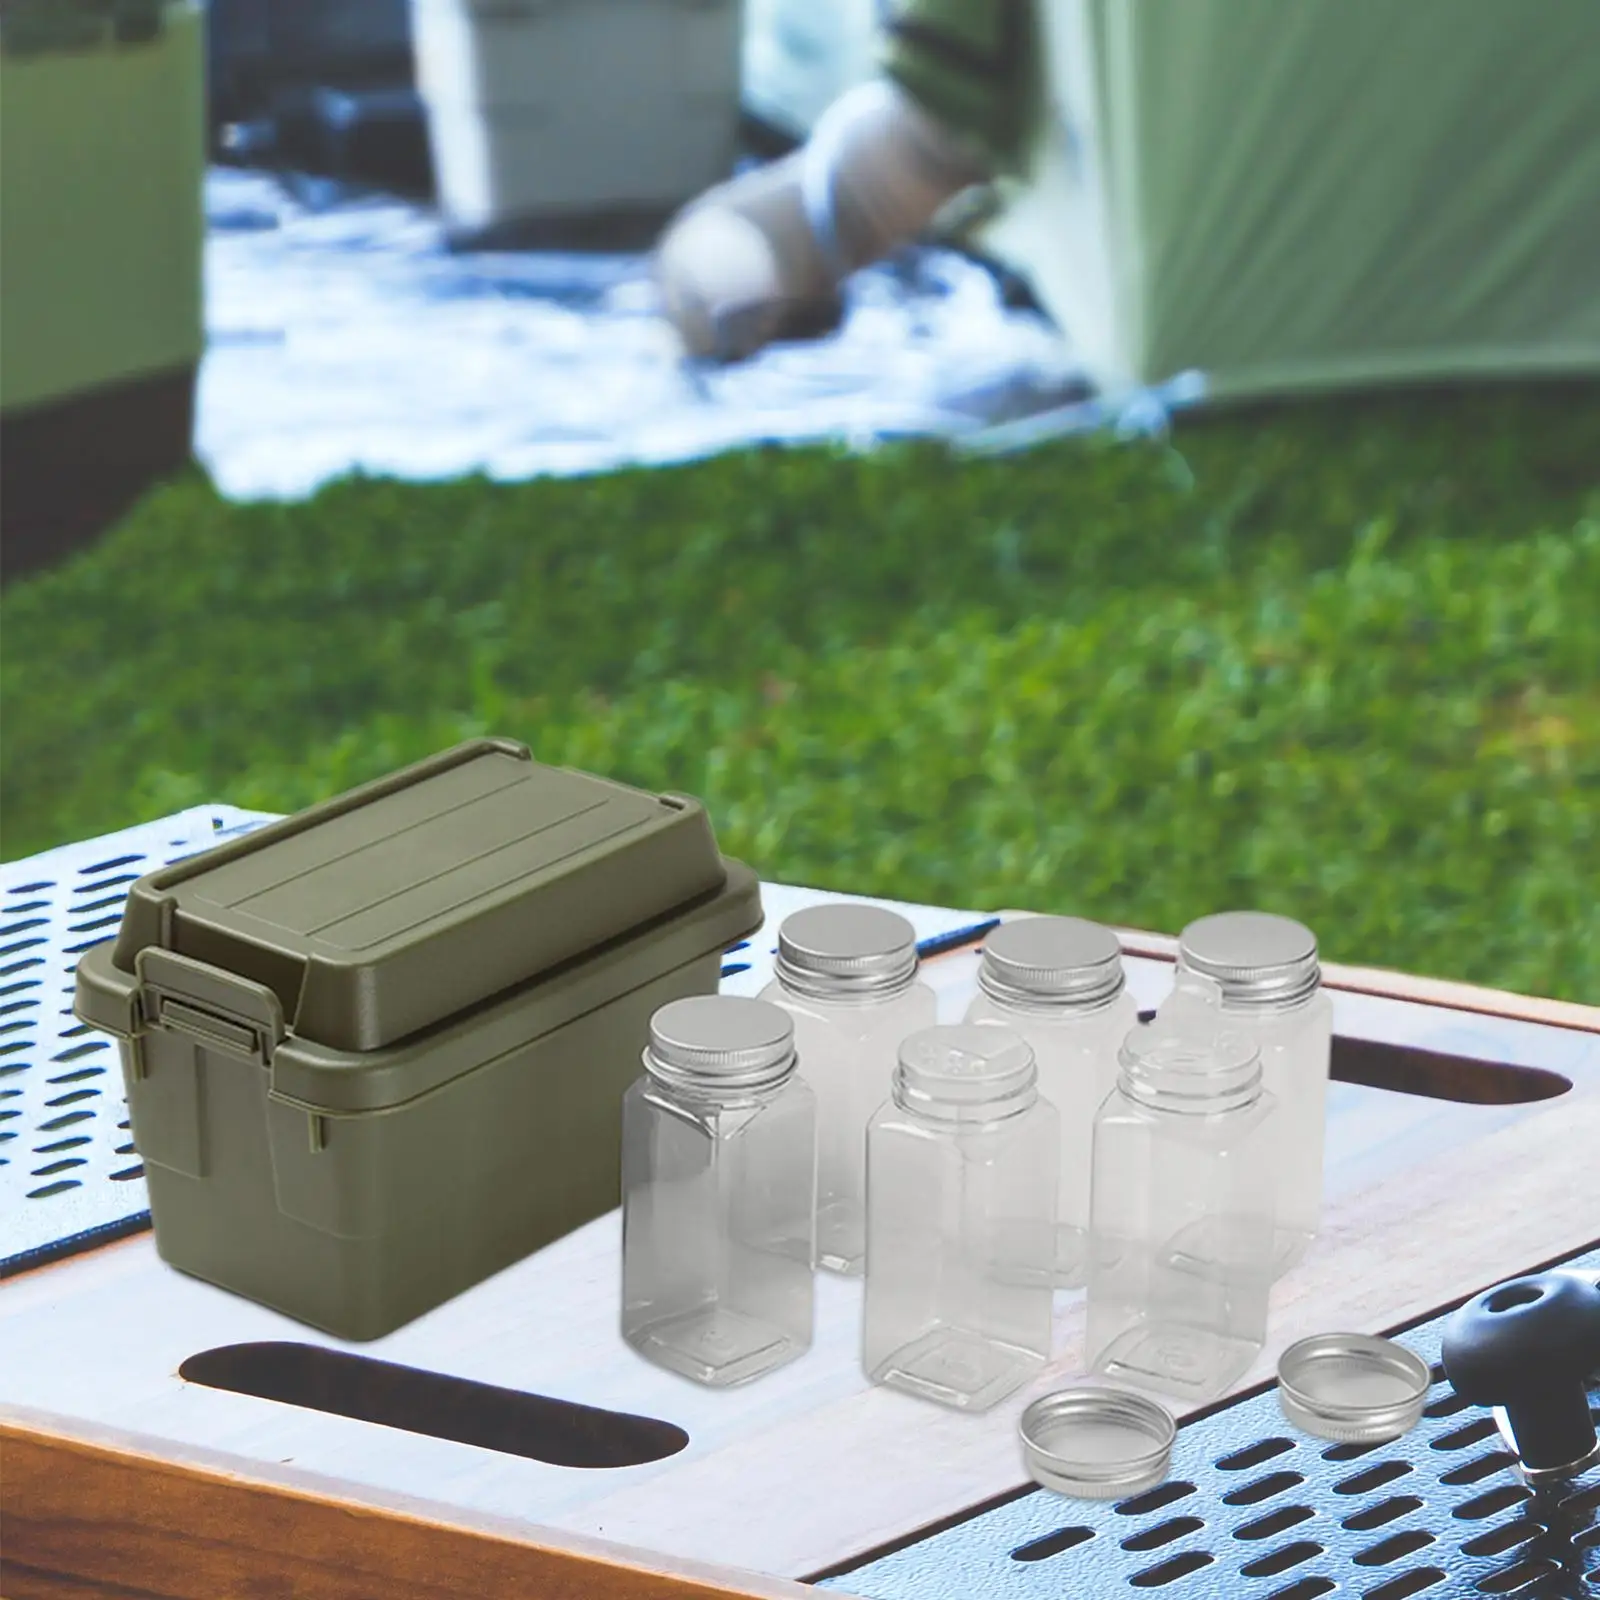 6Pcs Camping Spice Jars Bottle Seasoning Bottle with Spice Organizer Spice Containers for Home Backpacking Outdoor